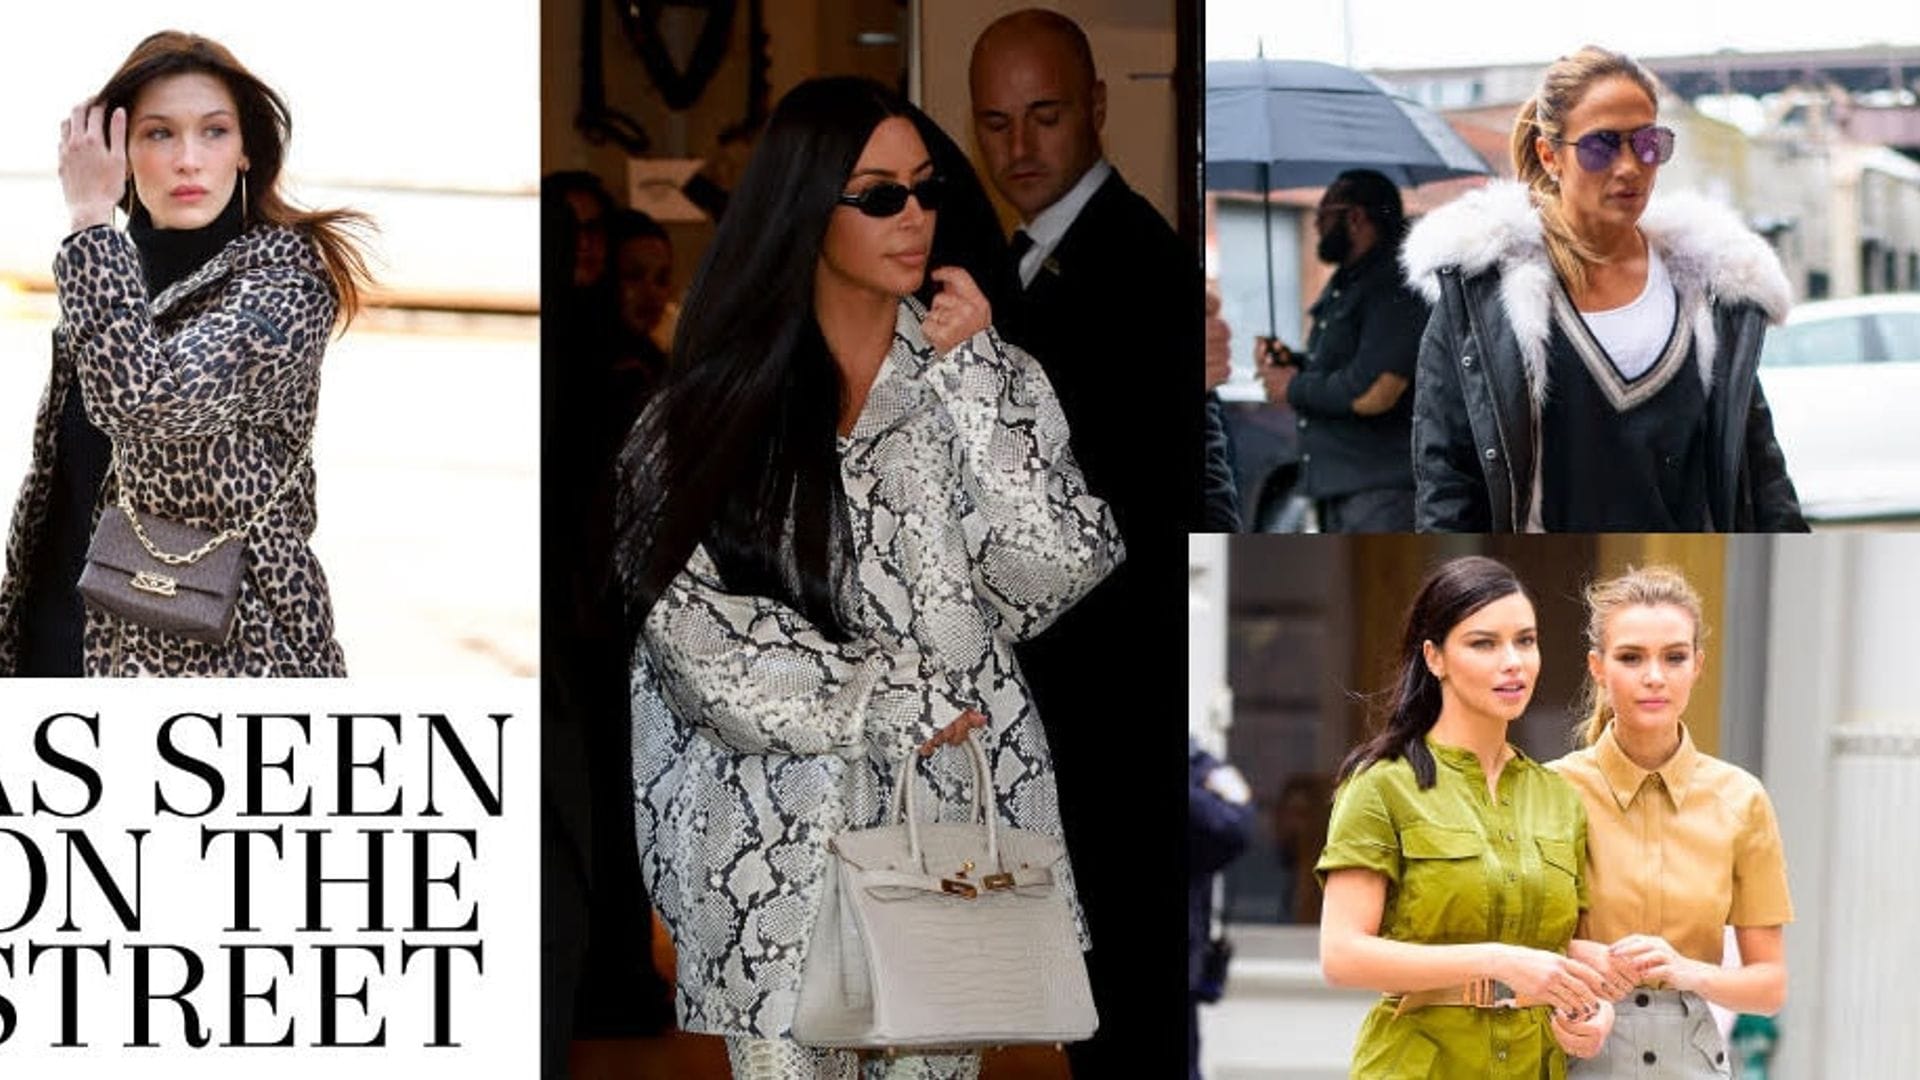 Has Kim Kardashian brought back a major '90s trend? Find out in this week's best dressed